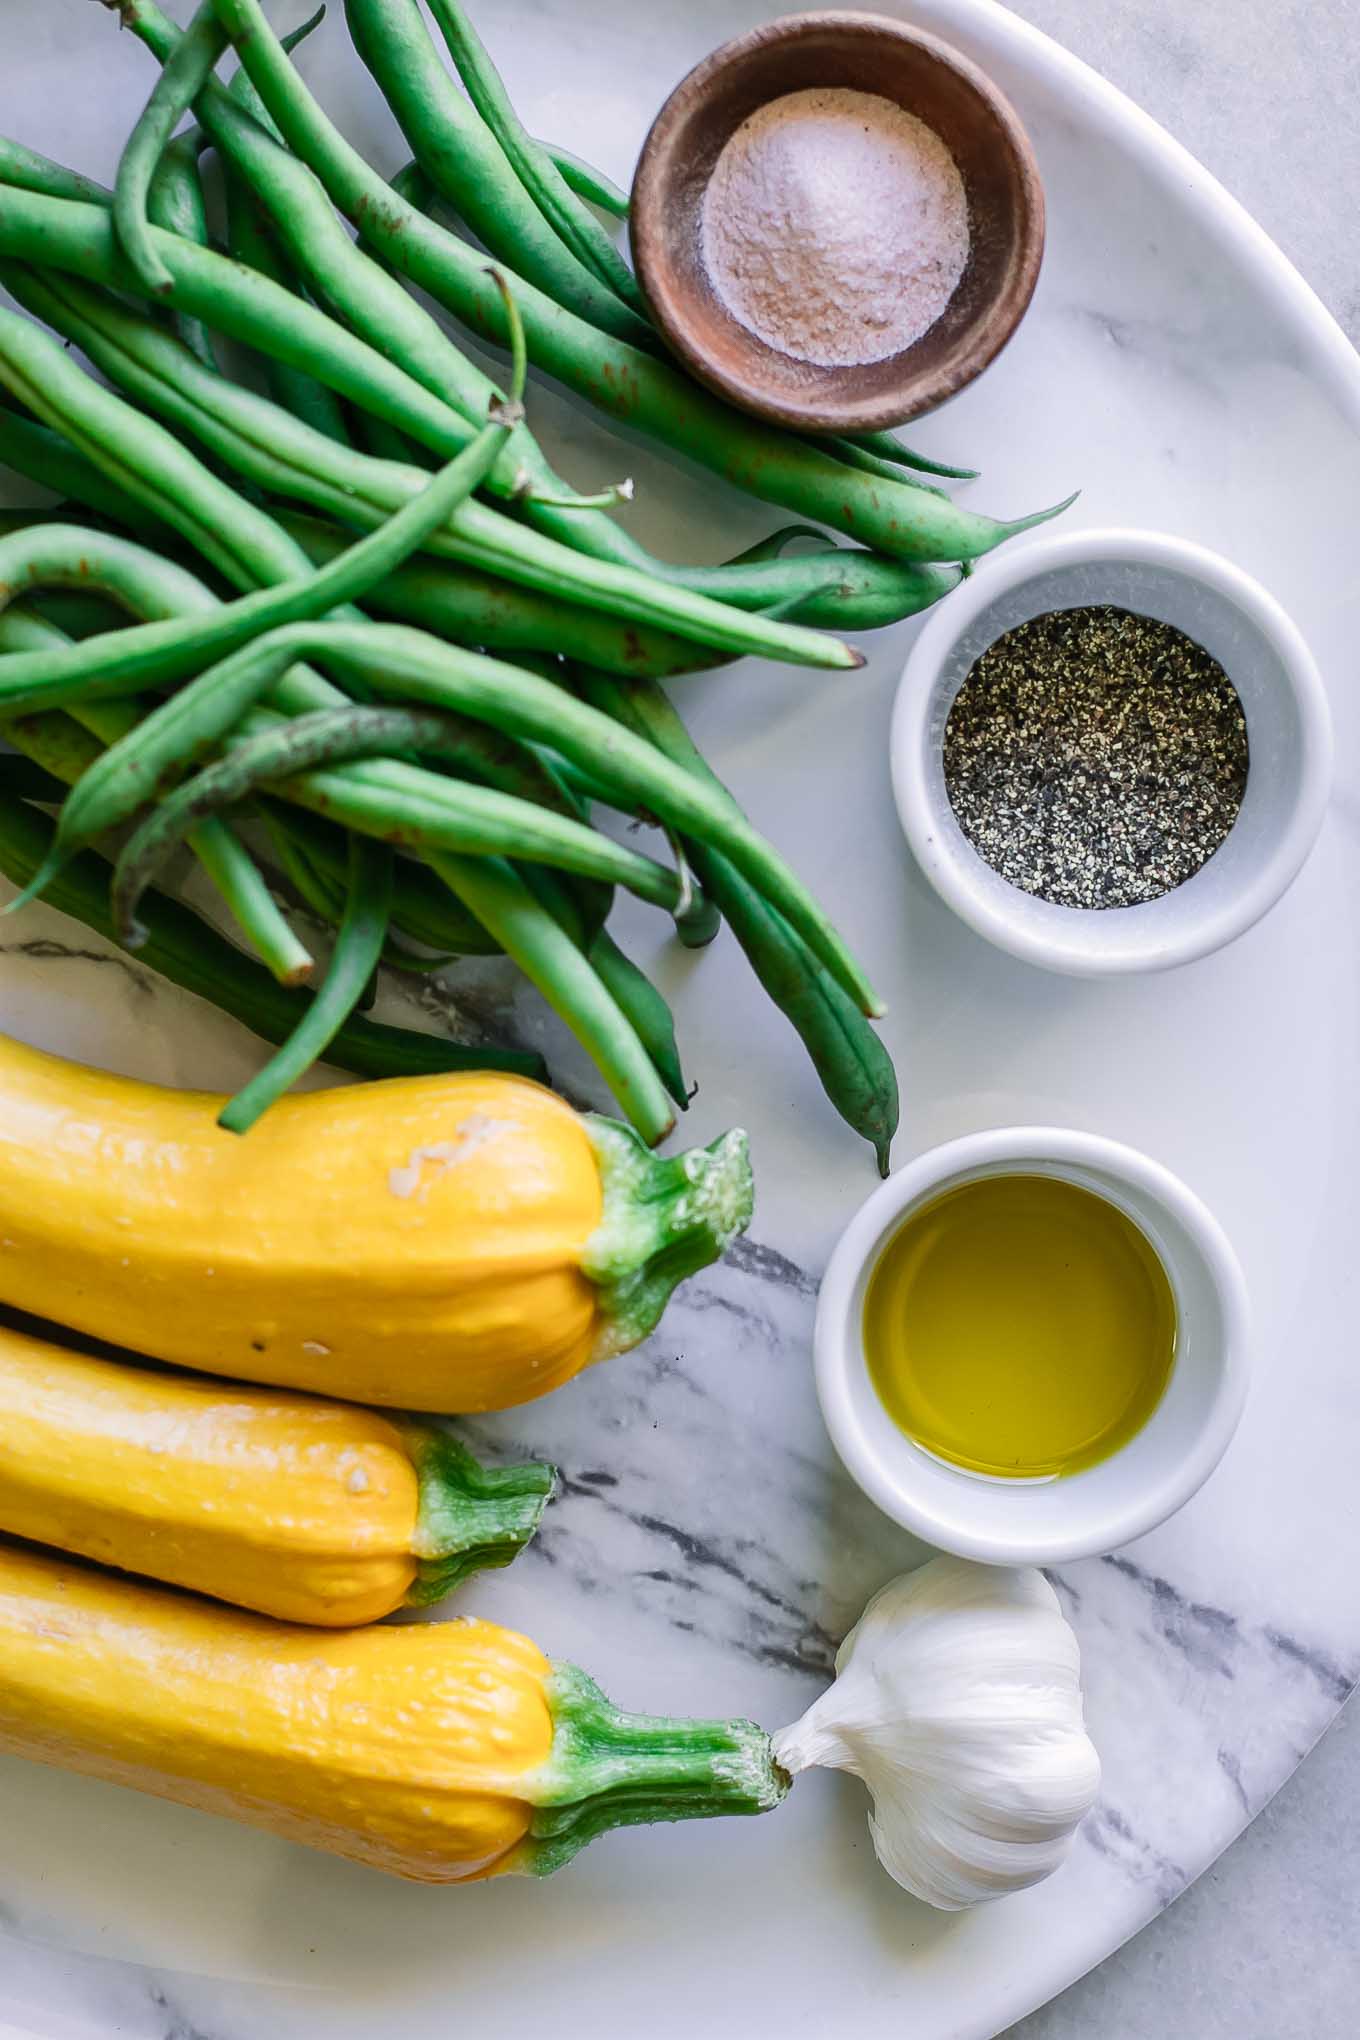 summer squash, green beans, and bowl of olive oil, salt, and pepper on a white table